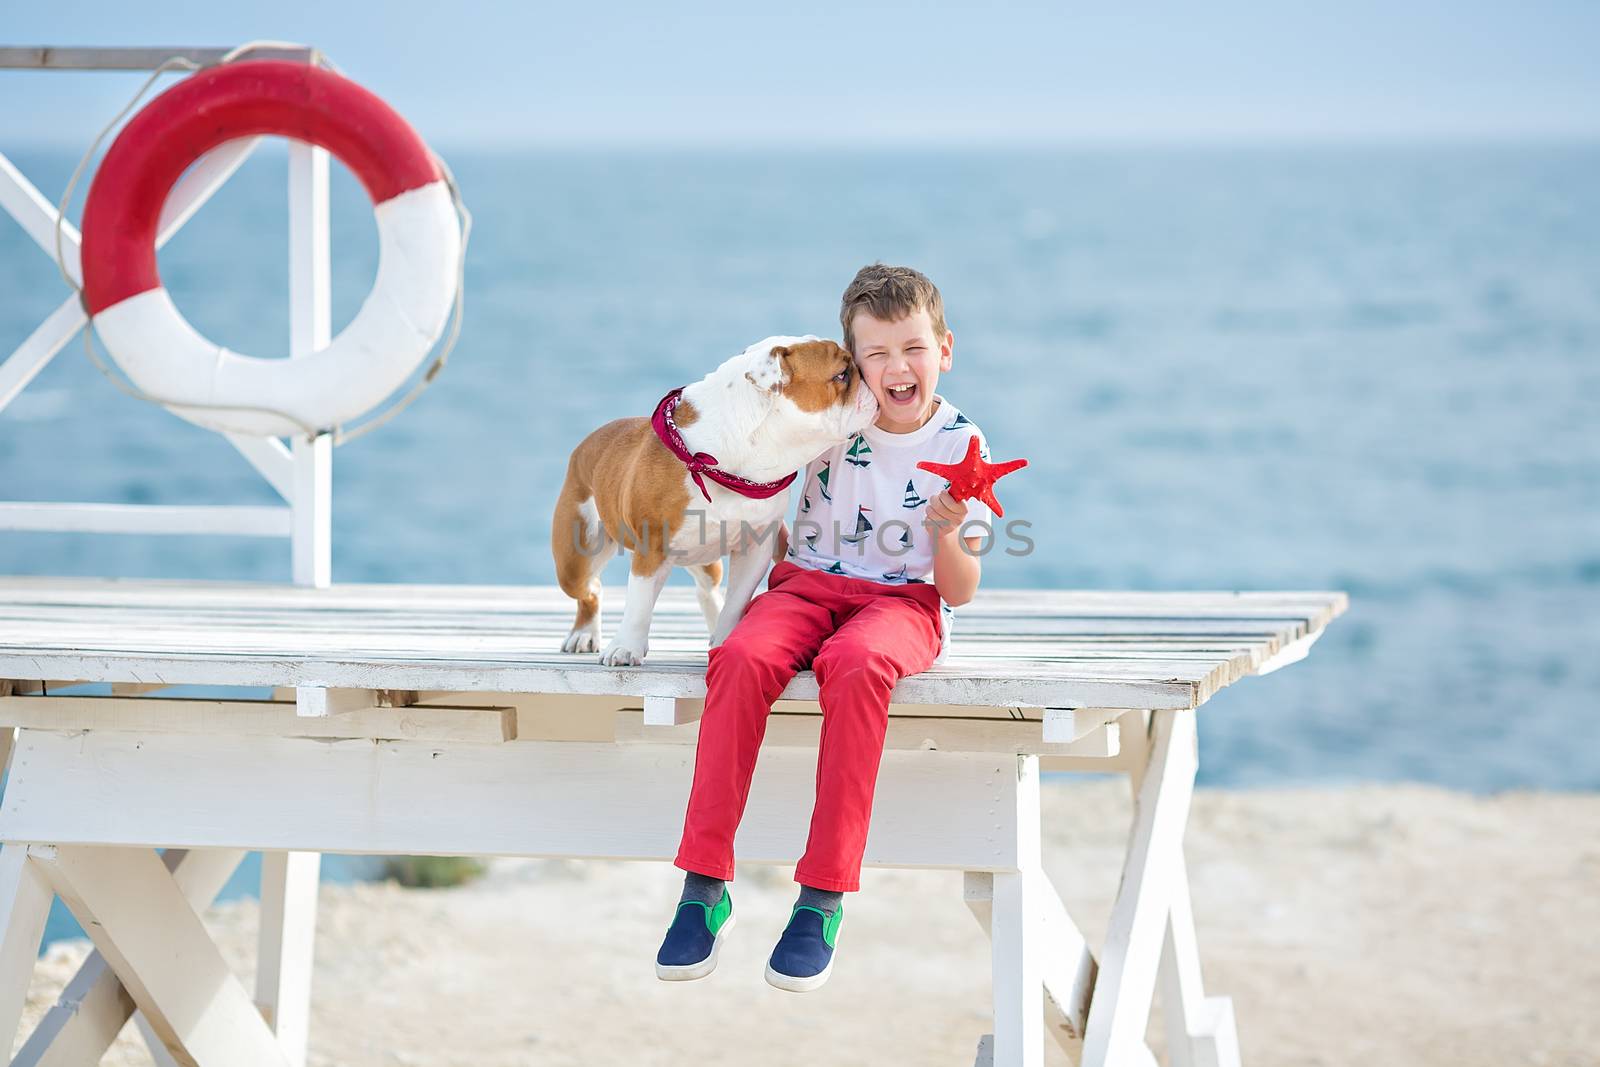 Handsome boy teen happyly spending time together with his friend bulldog on sea side Kid dog holding playing two sea stars close to life buoy float wearing red pants trousers slippers and t-shirt.